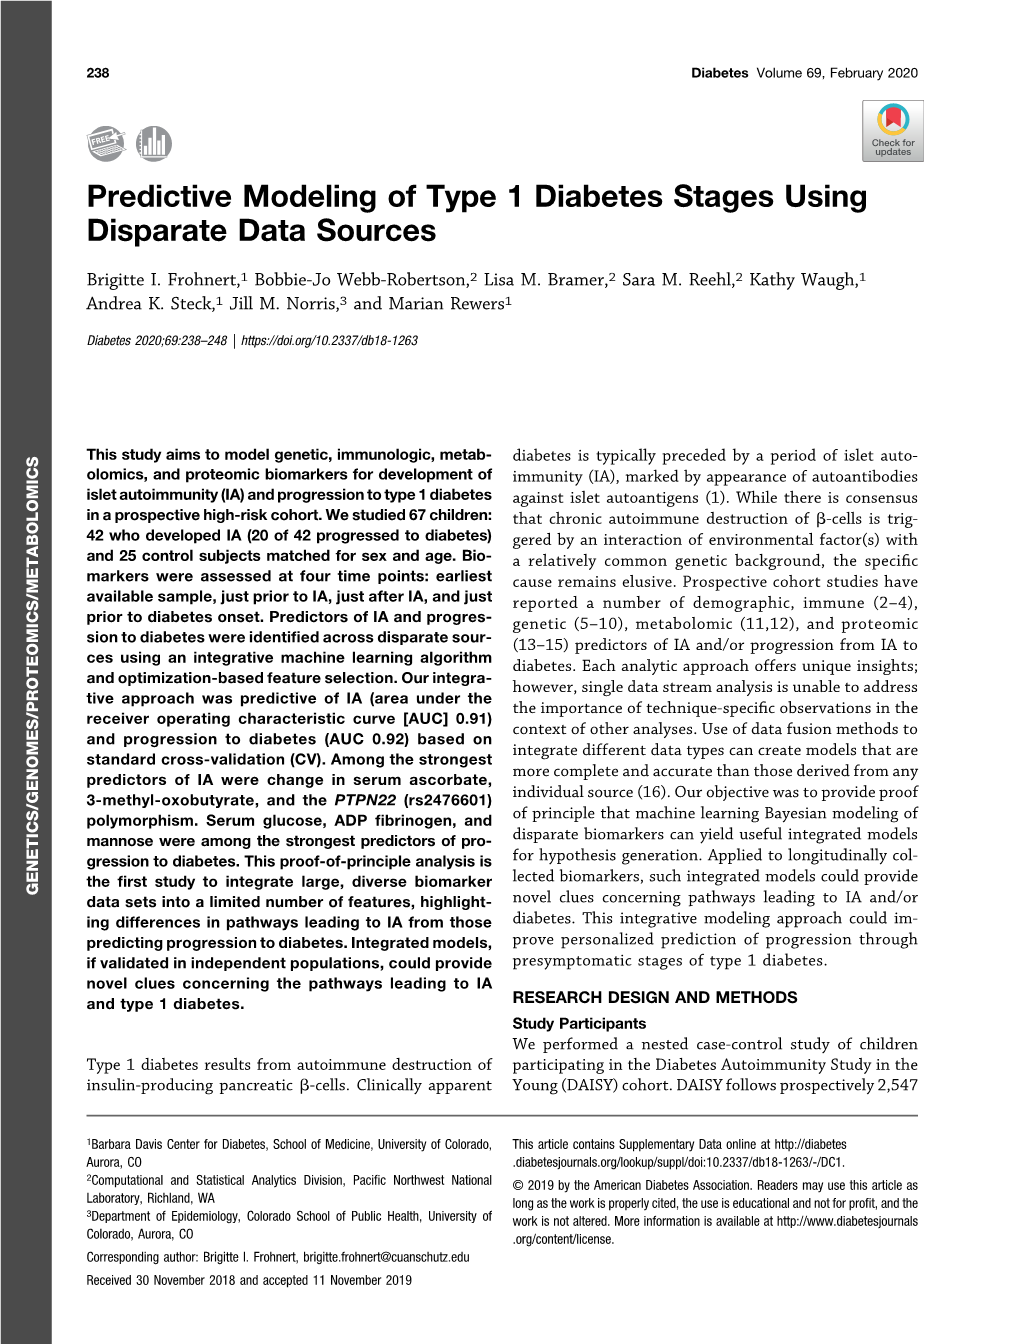 Predictive Modeling of Type 1 Diabetes Stages Using Disparate Data Sources